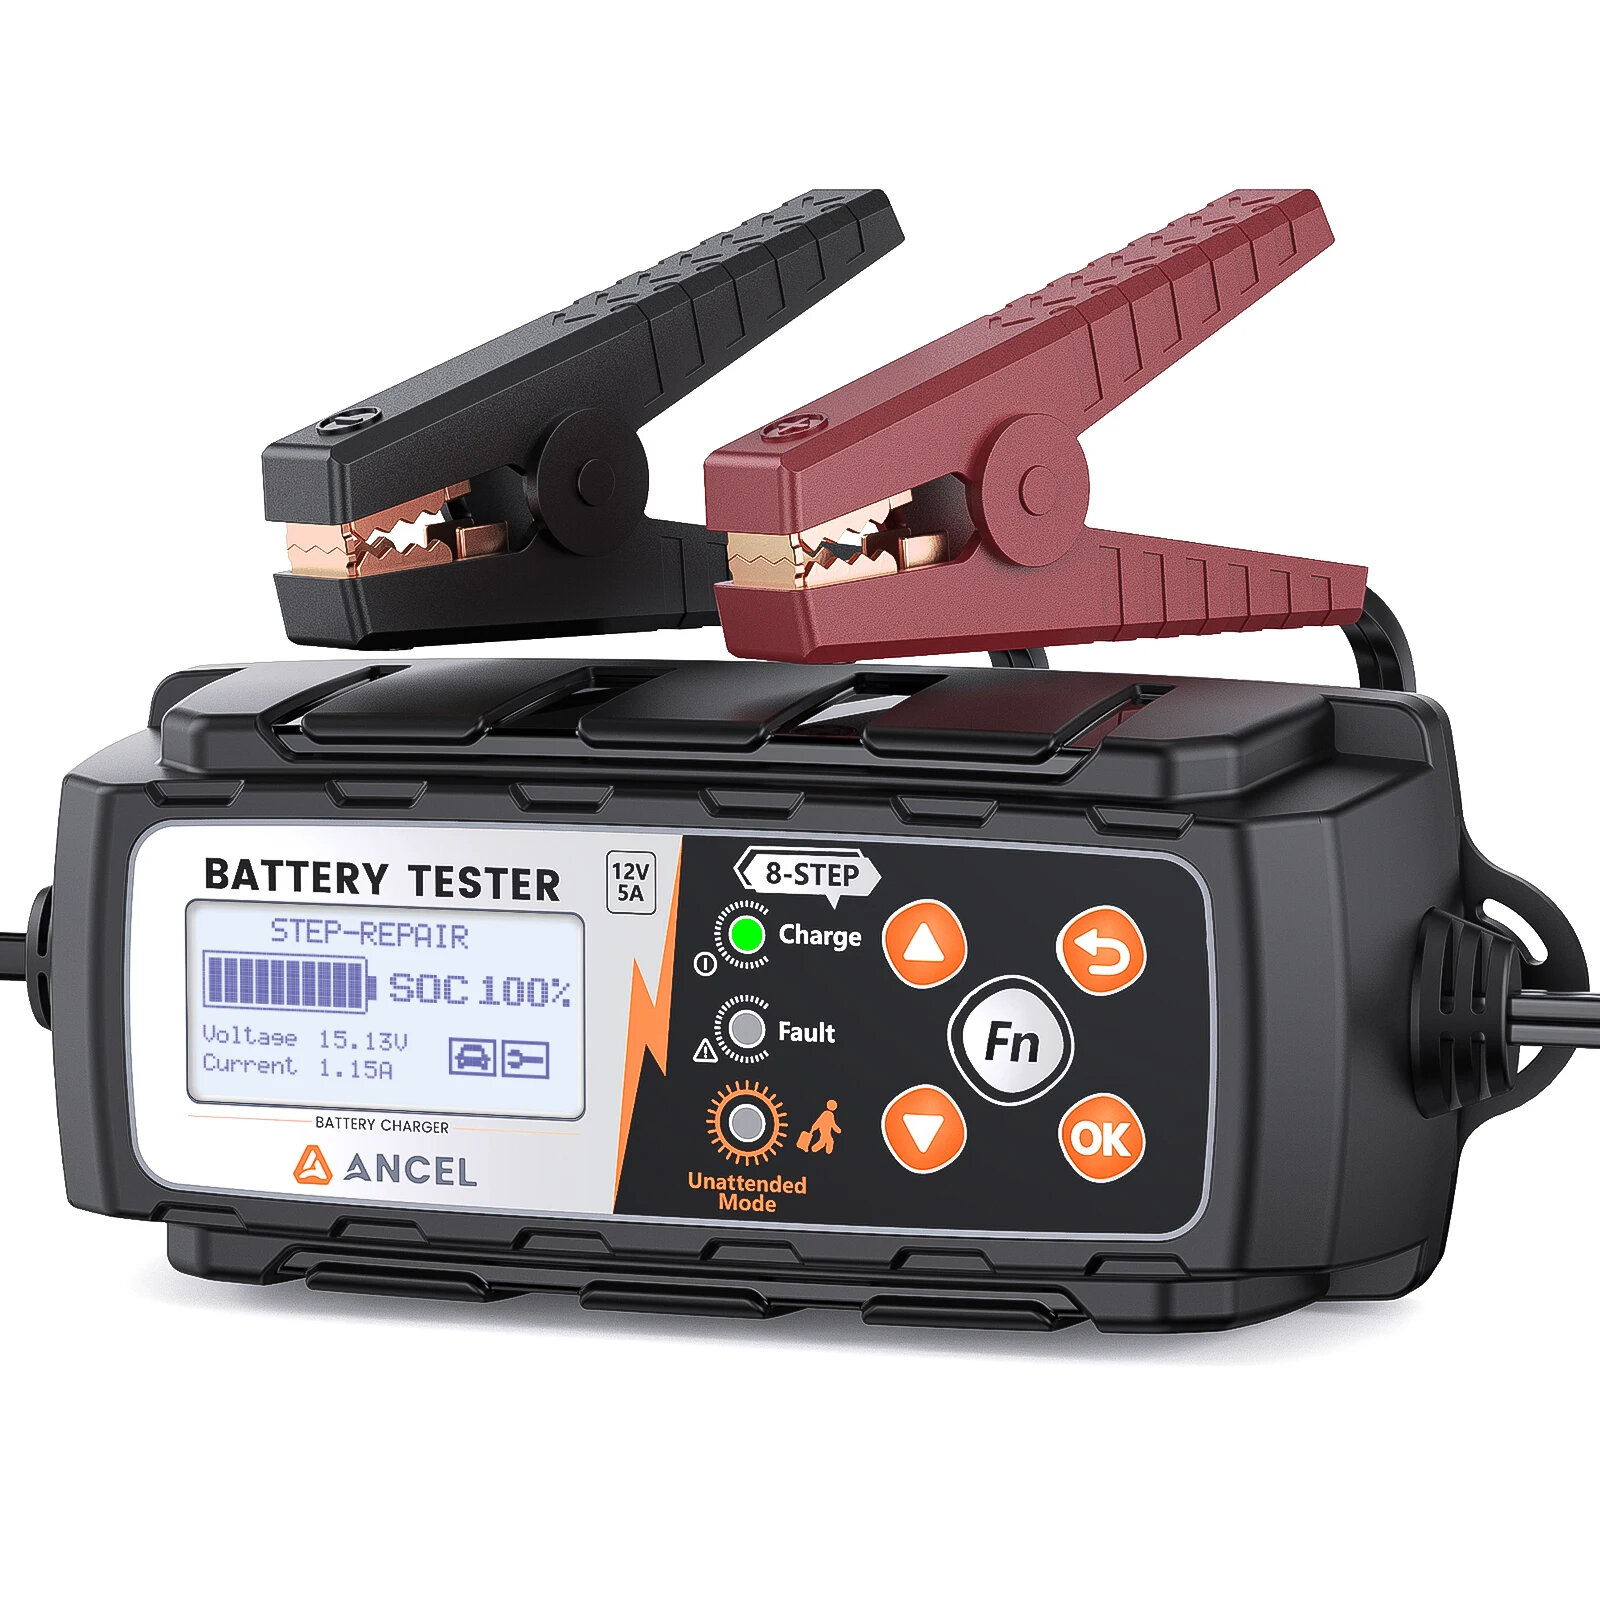 best price,ancel,bt521,12v,car,battery,tester,charger,coupon,price,discount